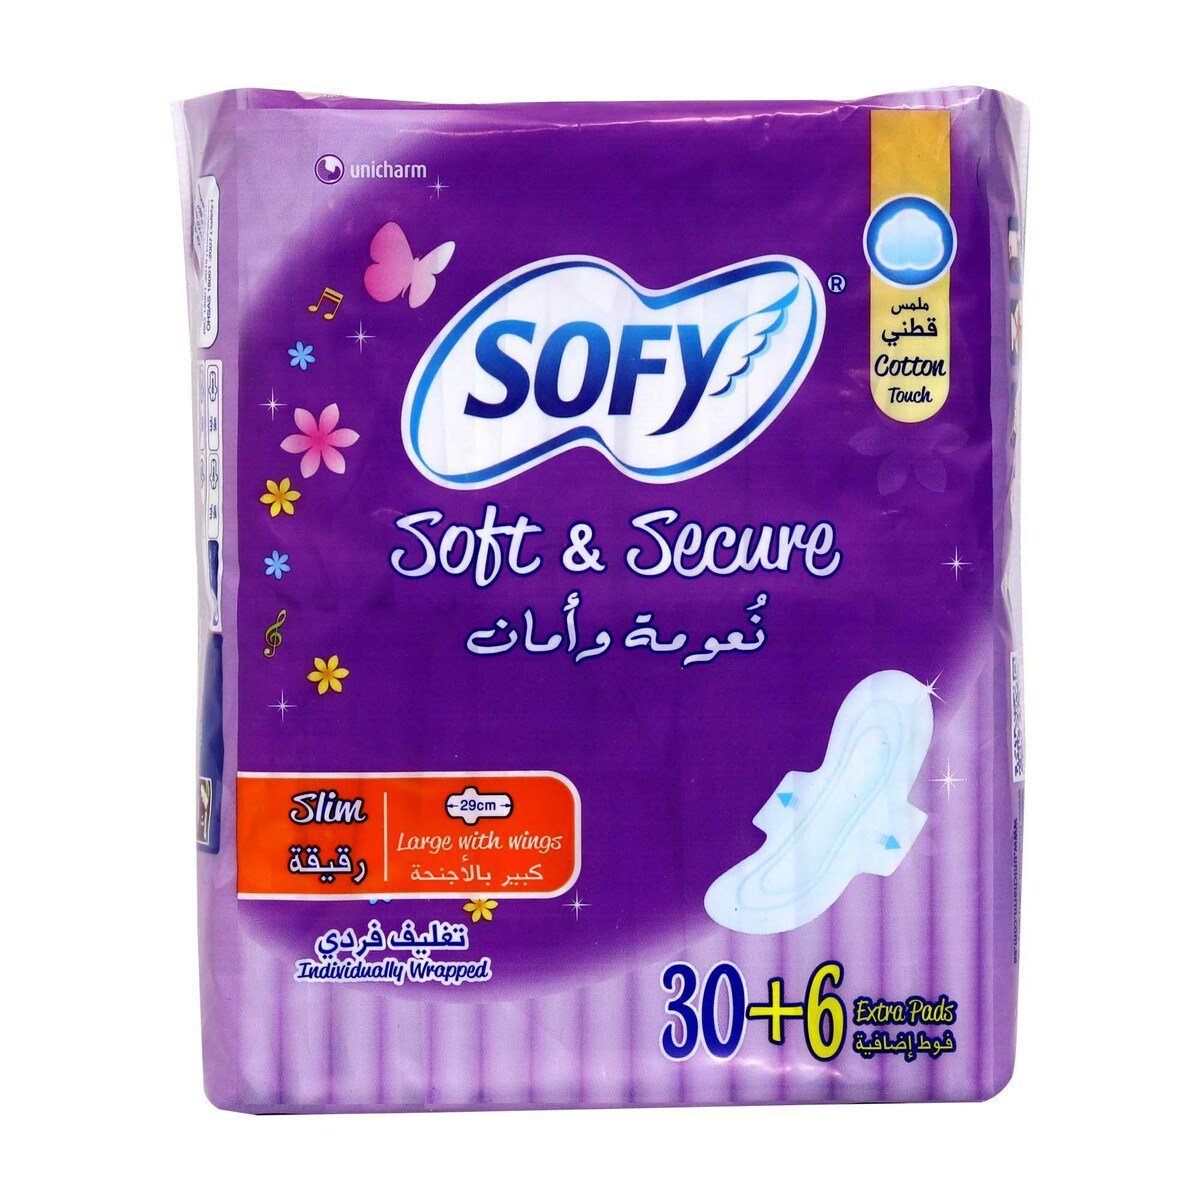 Sofy Soft & Secure Slim Pads Large With Wings  Size 29cm 30+6